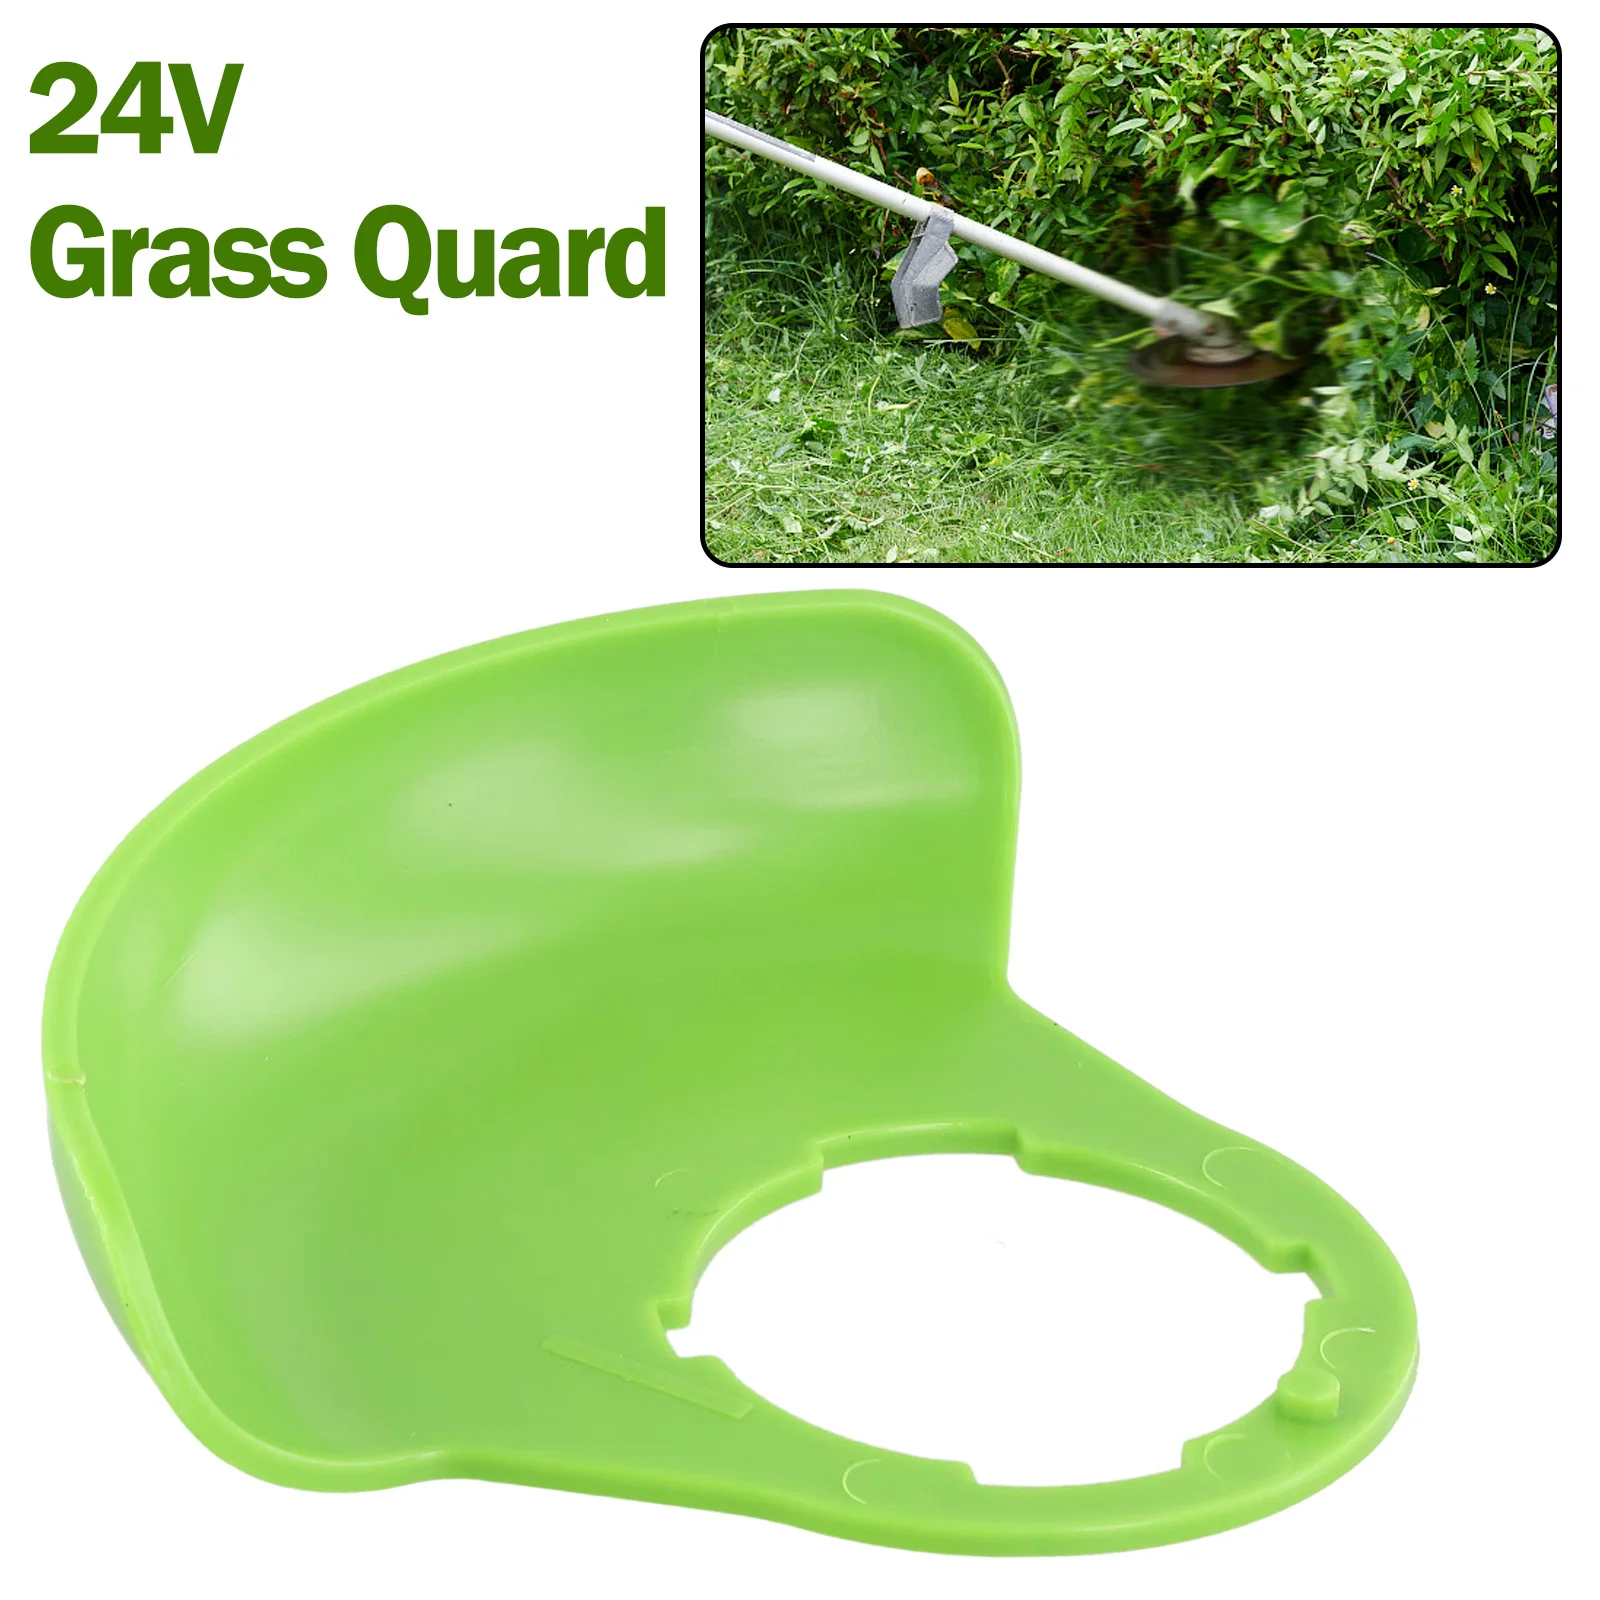 

1pcs Green Disassembled ABS Nylon Grass Guard Accessory Angle Adjustment Button For Pruning Grass Trimmers Garden Power Tools